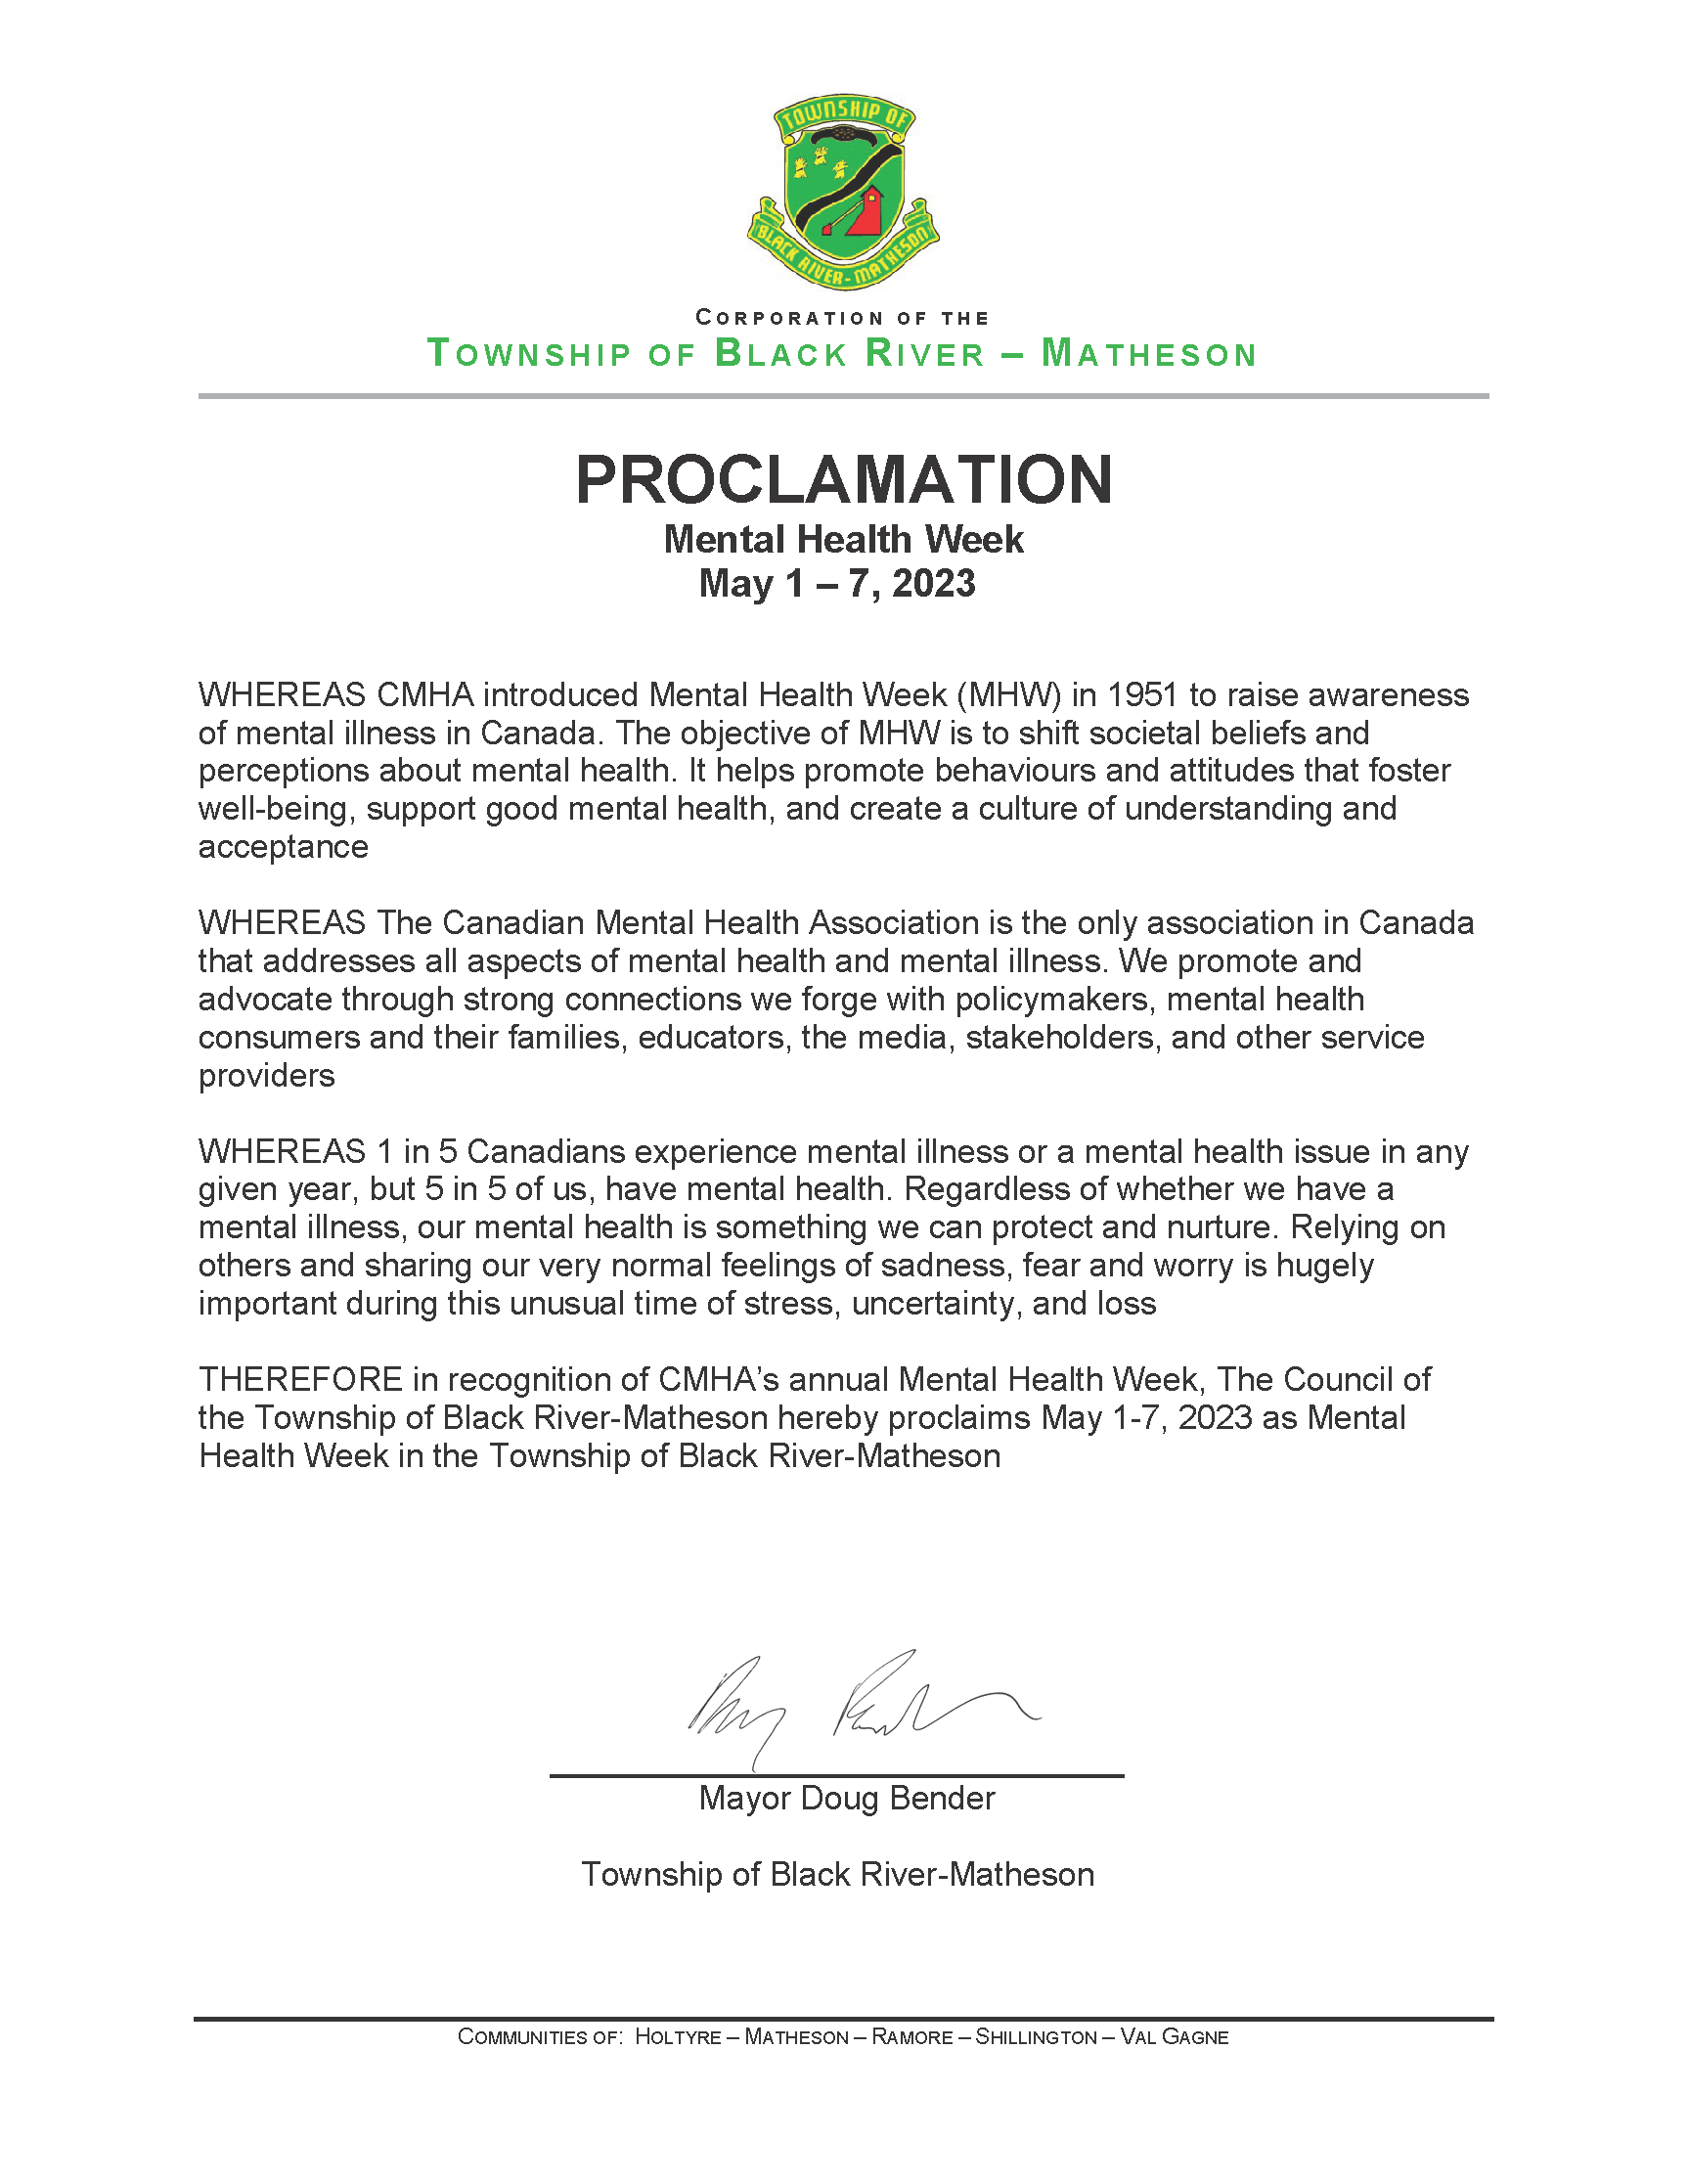 5.A) Township of BRM Mental Health Week Proclamation